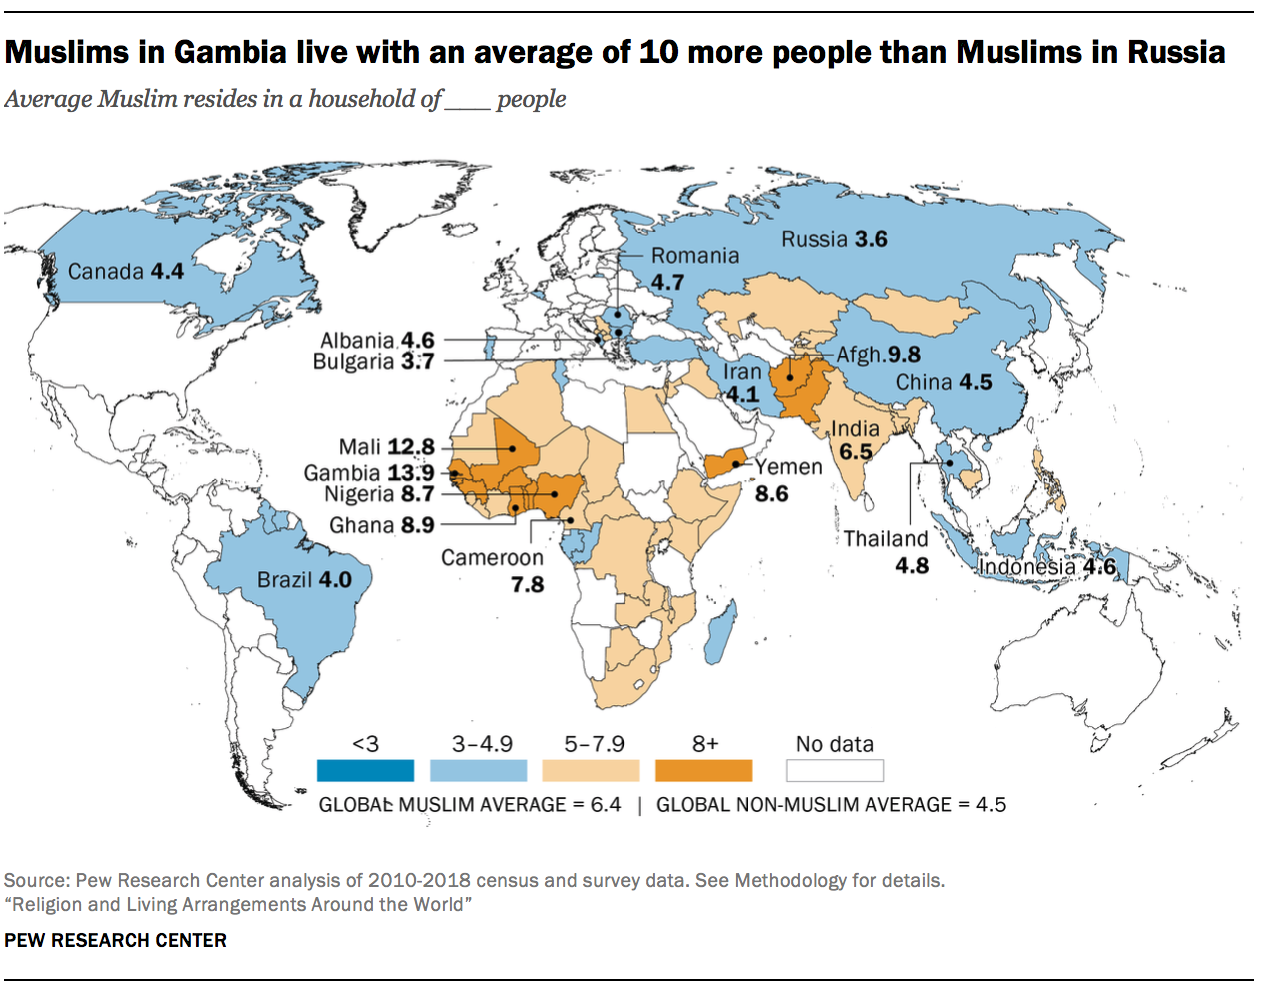 Muslims in Gambia live with an average of 10 more people than Muslims in Russia